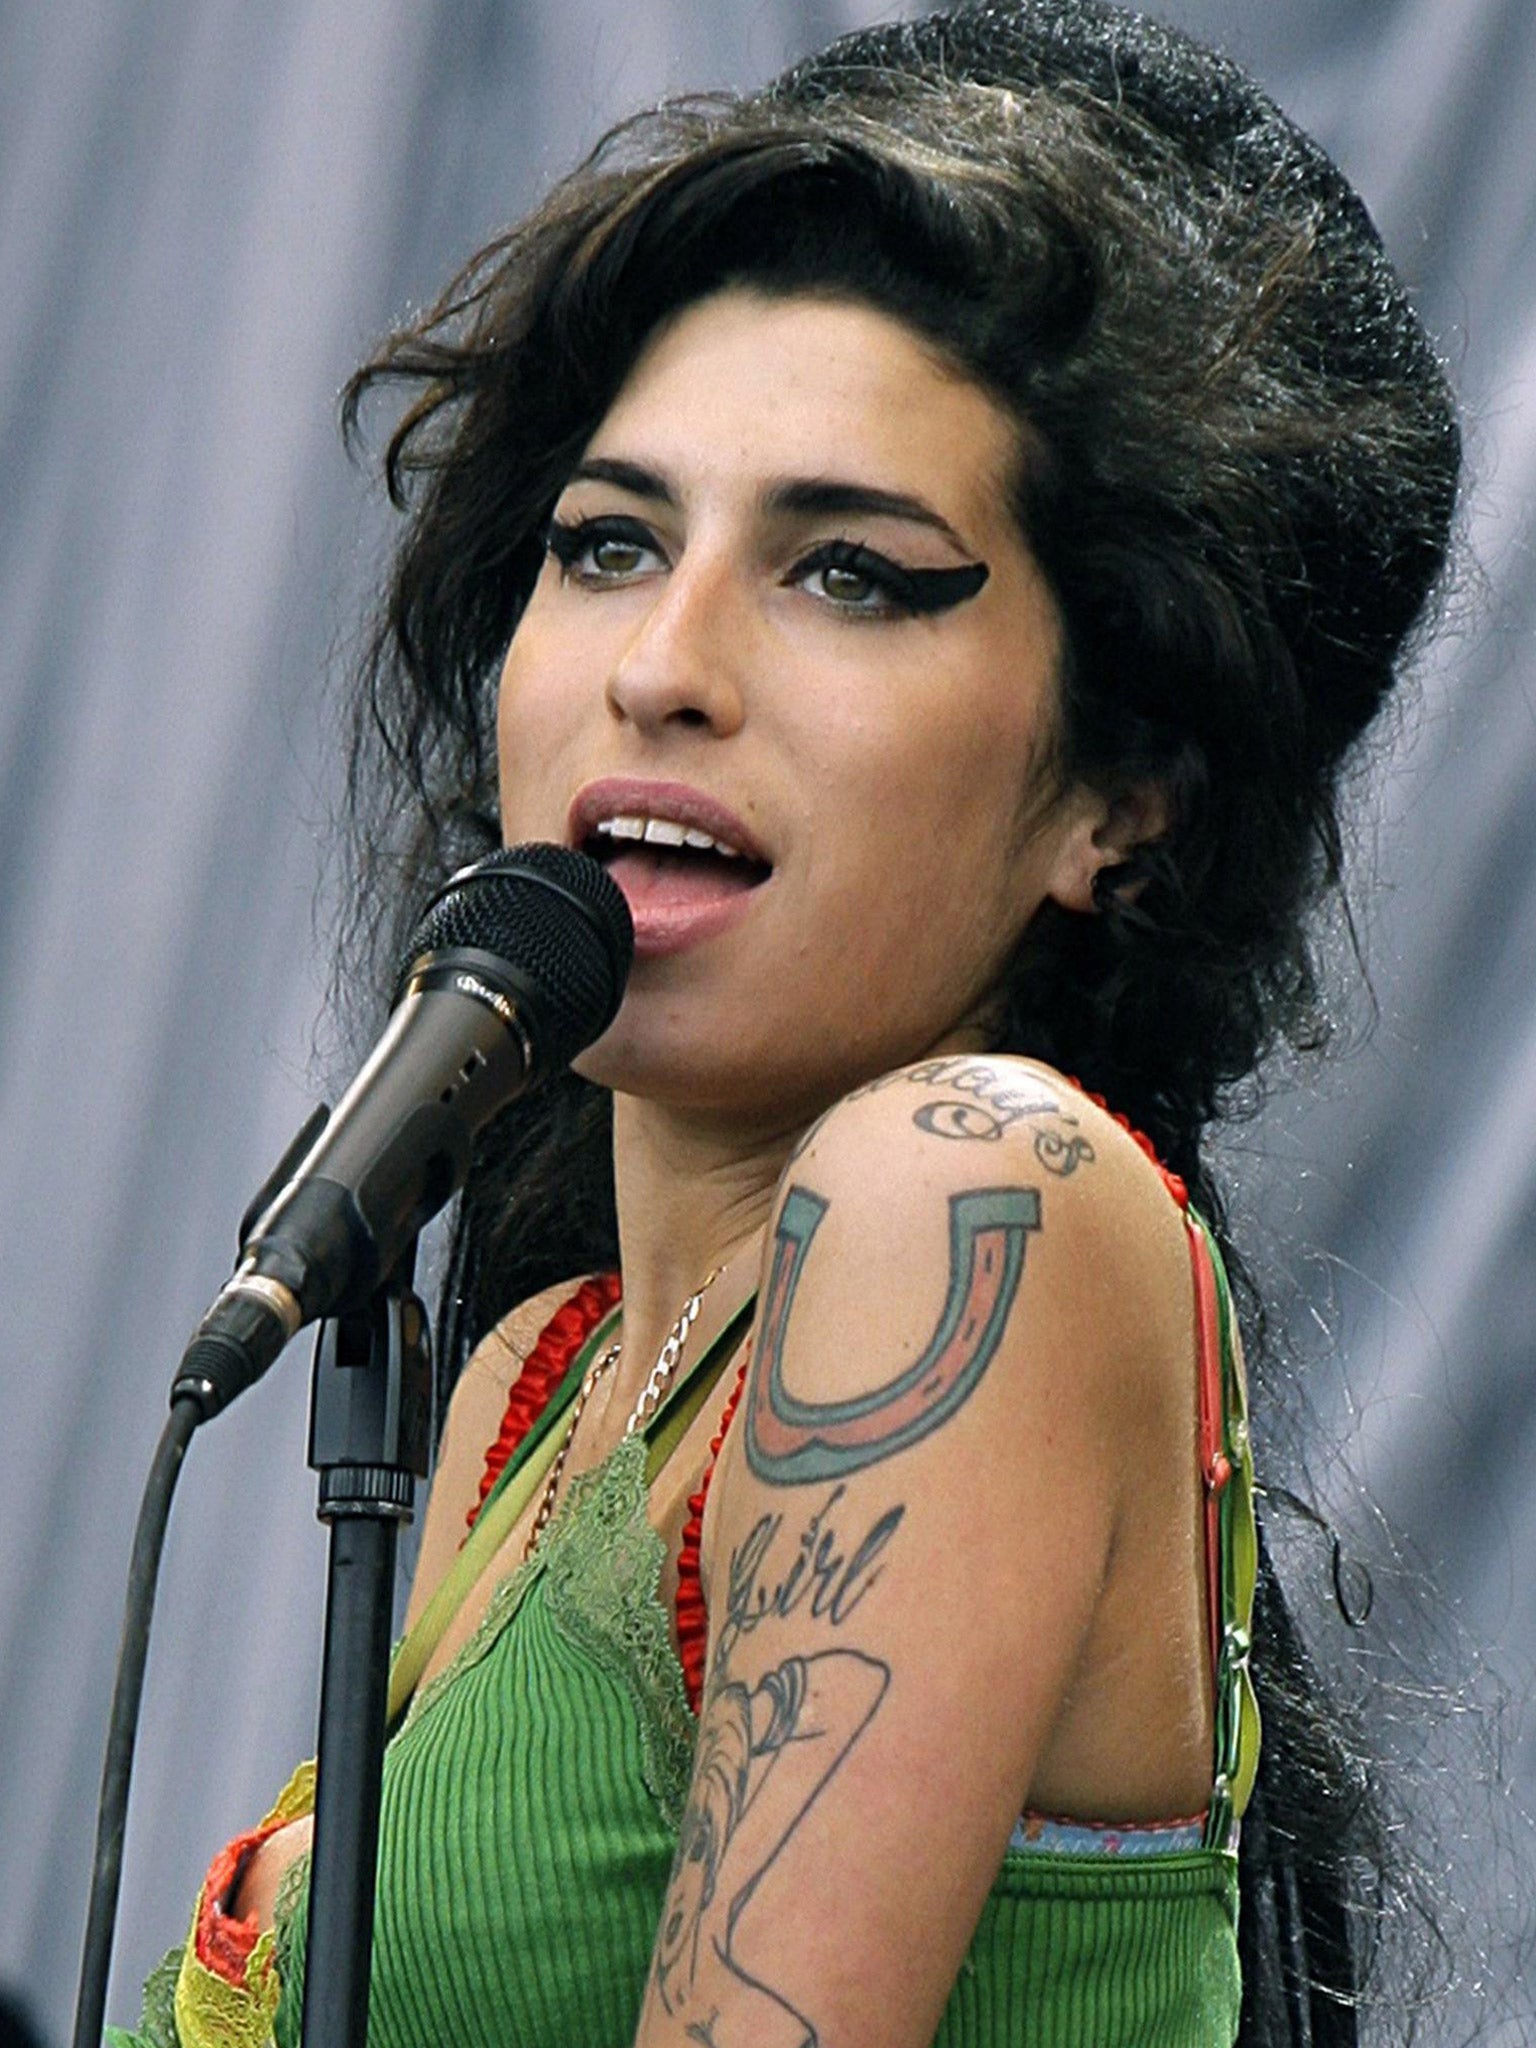 A second inquest into the death of singer Amy Winehouse has confirmed that her death was caused by alcohol